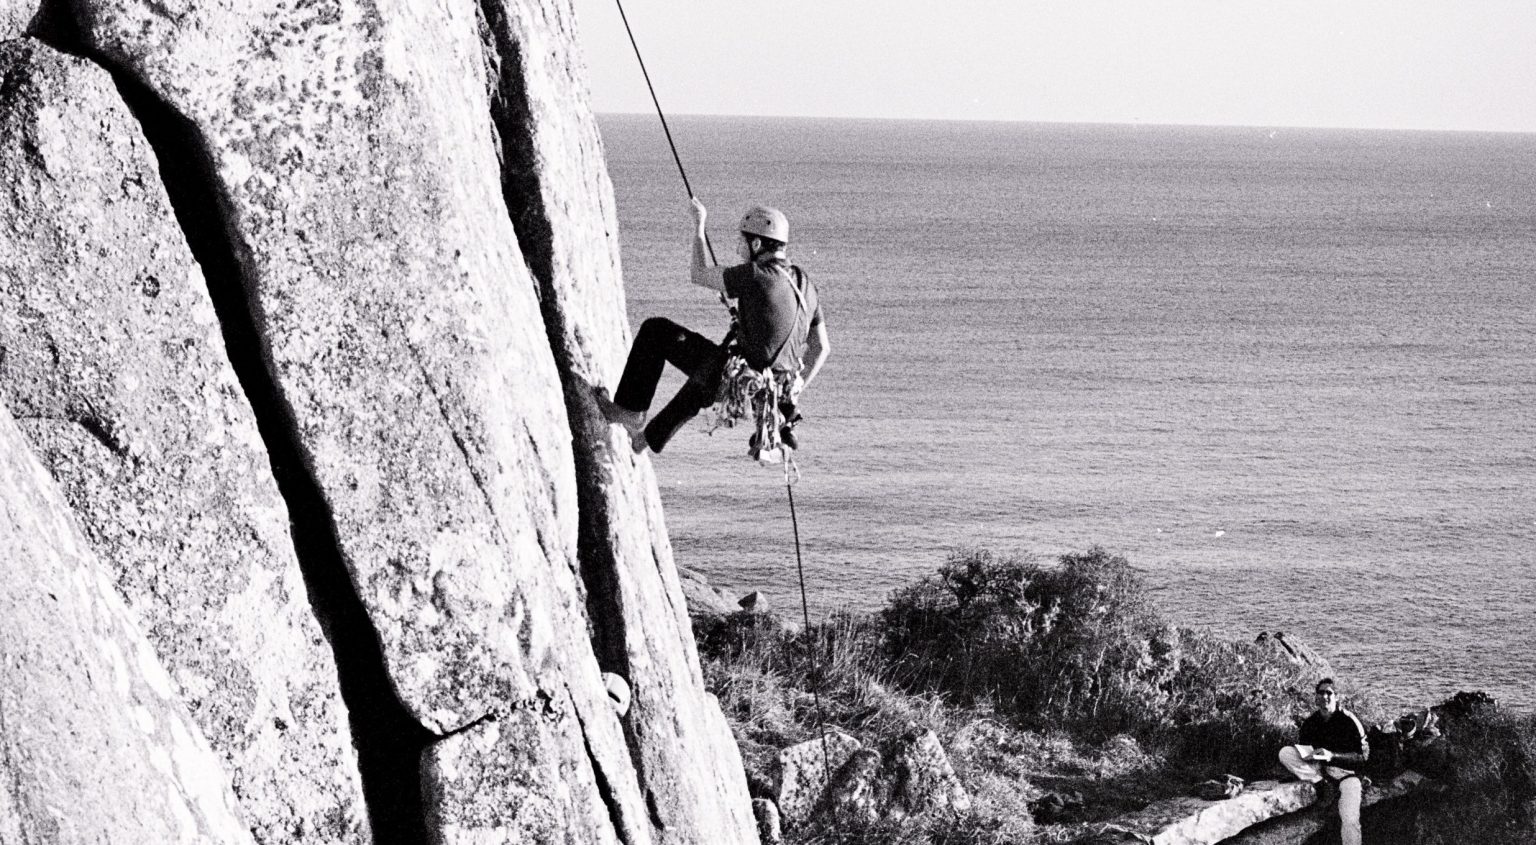 Adrenaline Activities for Thrill Seekers in Cornwall